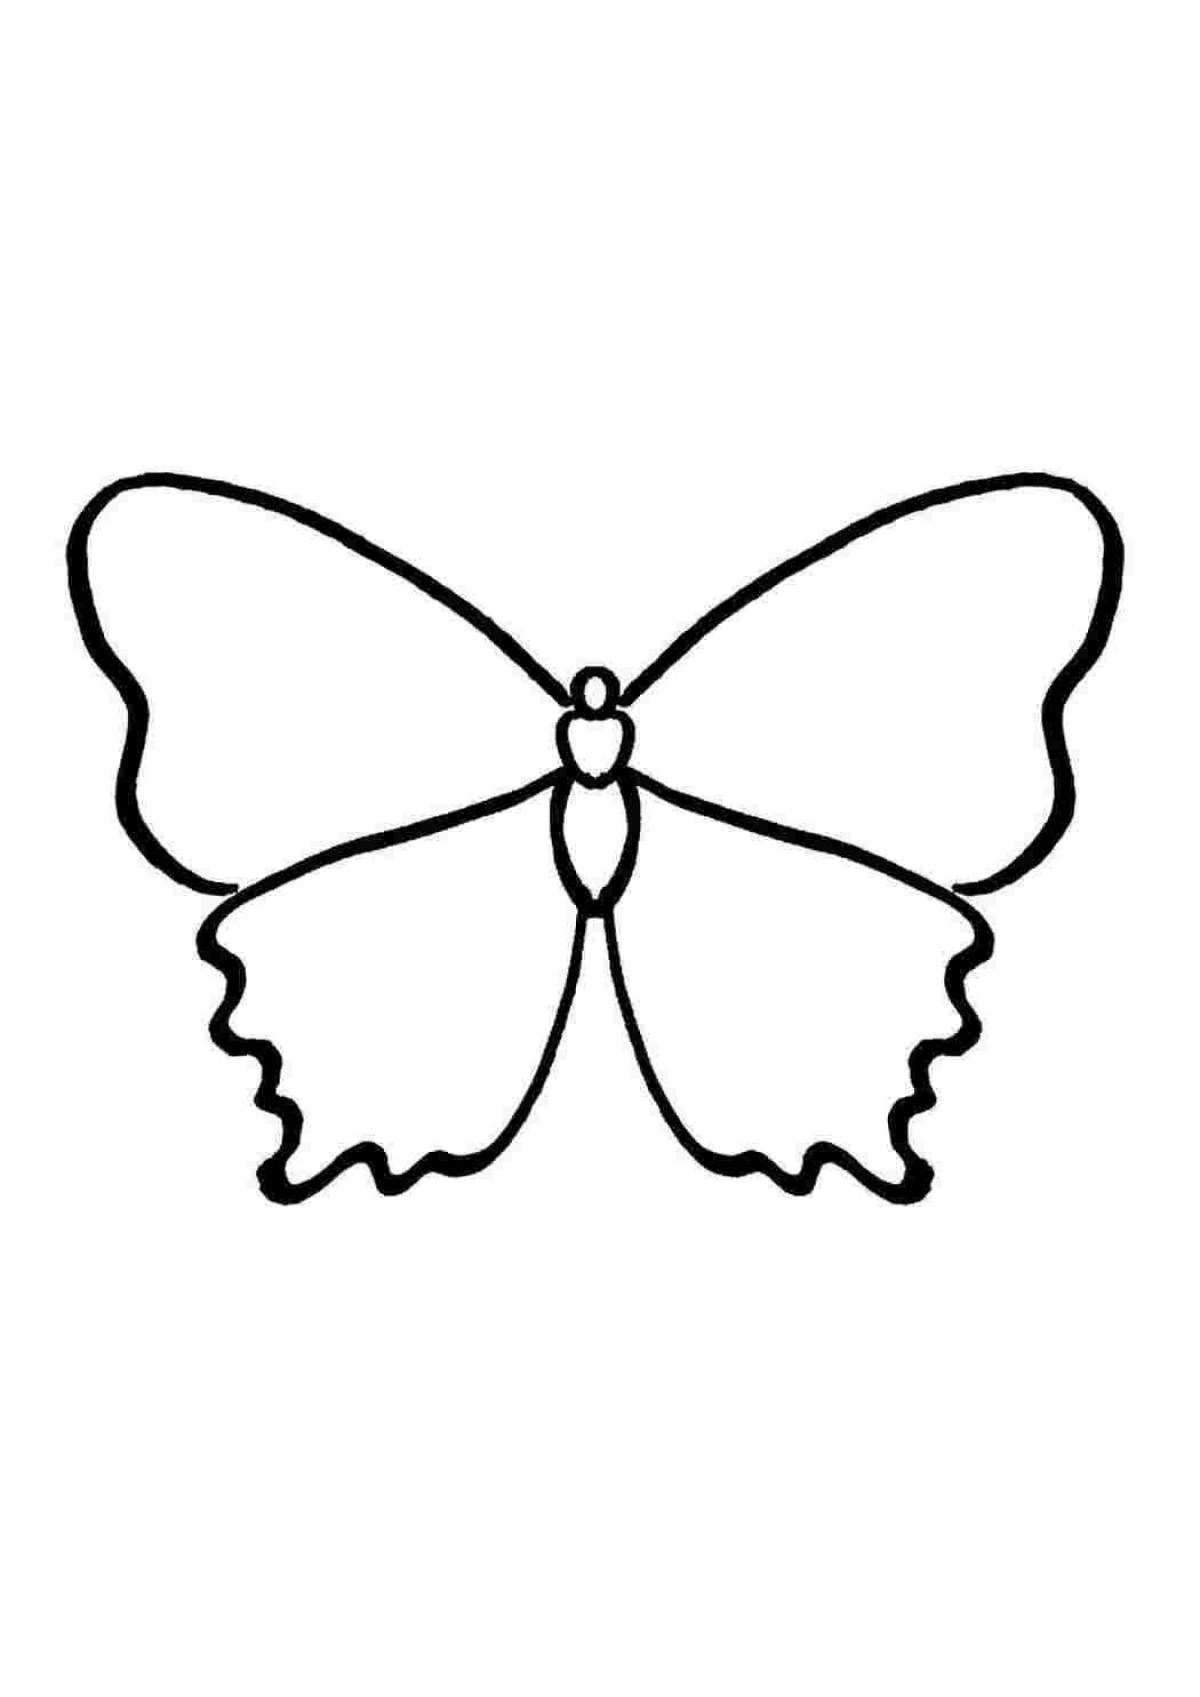 Great butterfly coloring book for 2-3 year olds